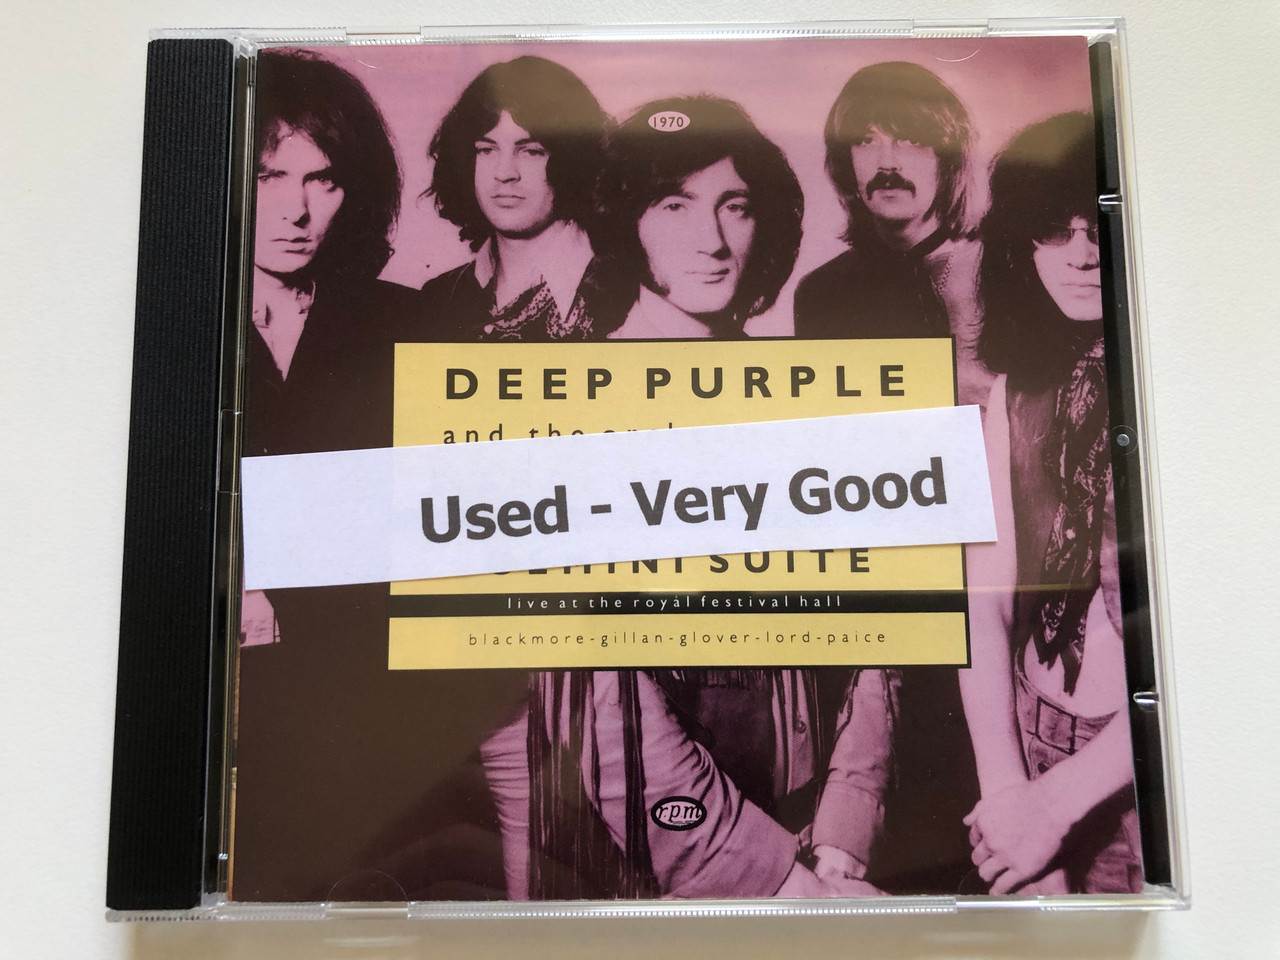 https://cdn10.bigcommerce.com/s-62bdpkt7pb/products/0/images/237549/Deep_Purple_And_The_Orchestra_Of_The_Light_Music_Society_-_Conducted_By_Malcolm_Arnold_Gemini_Suite_Live_at_the_Royal_Festival_Hall_RPM_Records_Audio_CD_1993_RPM_114_4__84735.1657196976.1280.1280.JPG?c=2&_gl=1*ztiuu3*_ga*MjA2NTIxMjE2MC4xNTkwNTEyNTMy*_ga_WS2VZYPC6G*MTY1NzE5NjE4Ni40NzAuMS4xNjU3MTk3MDA2LjYw